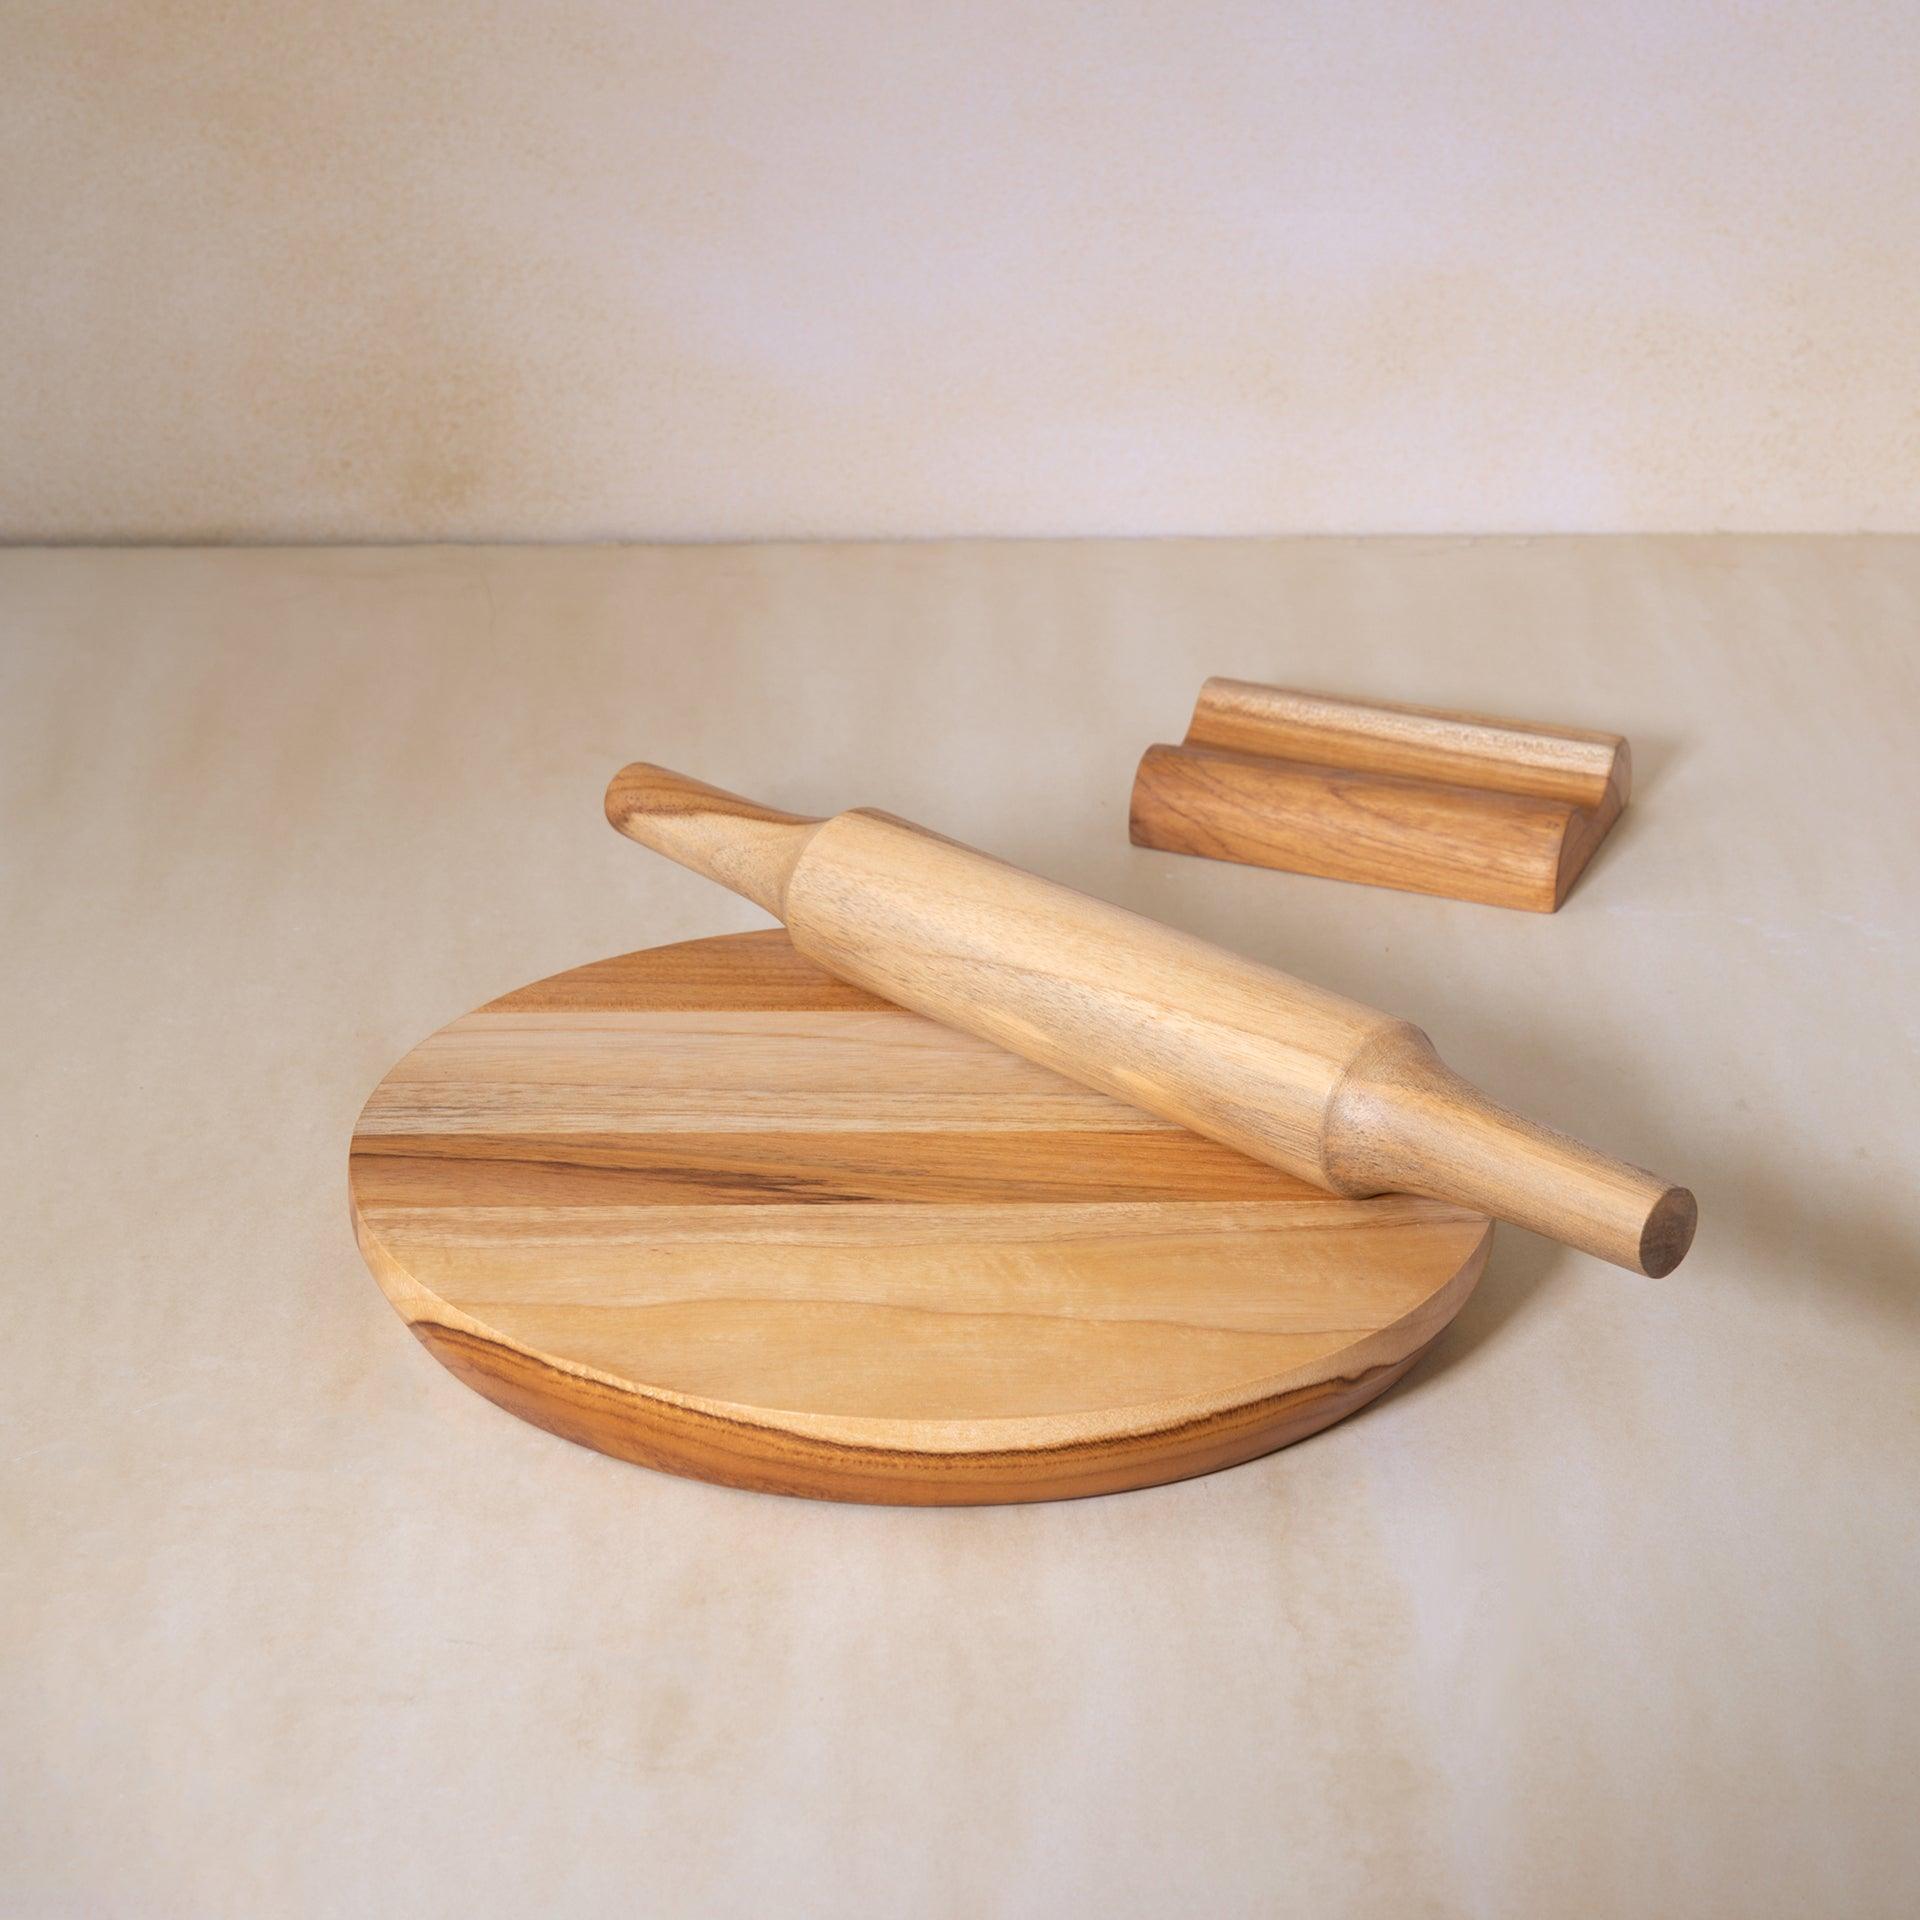 in teak wooden chakla belan with stand- small